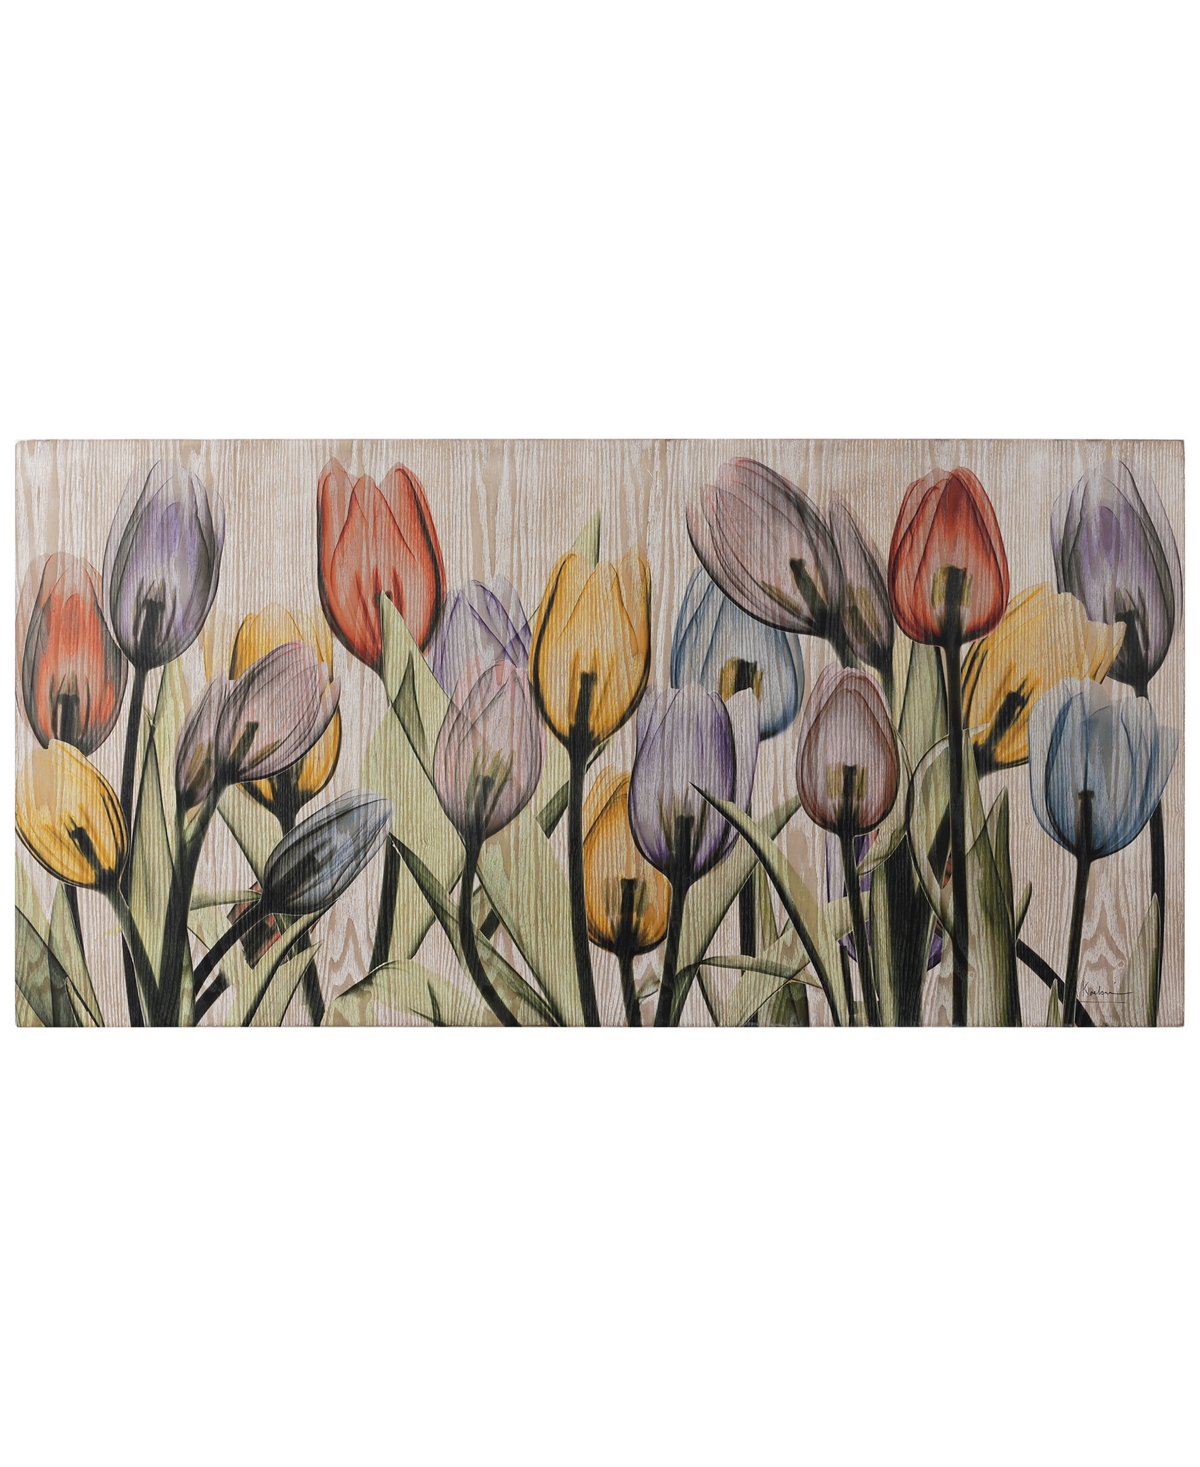 Empire Art Direct "tulipscape" Fine Radiographic Photography Giclee Printed Directly On Hand Finished Ash Wood Wall Ar In Multi-color